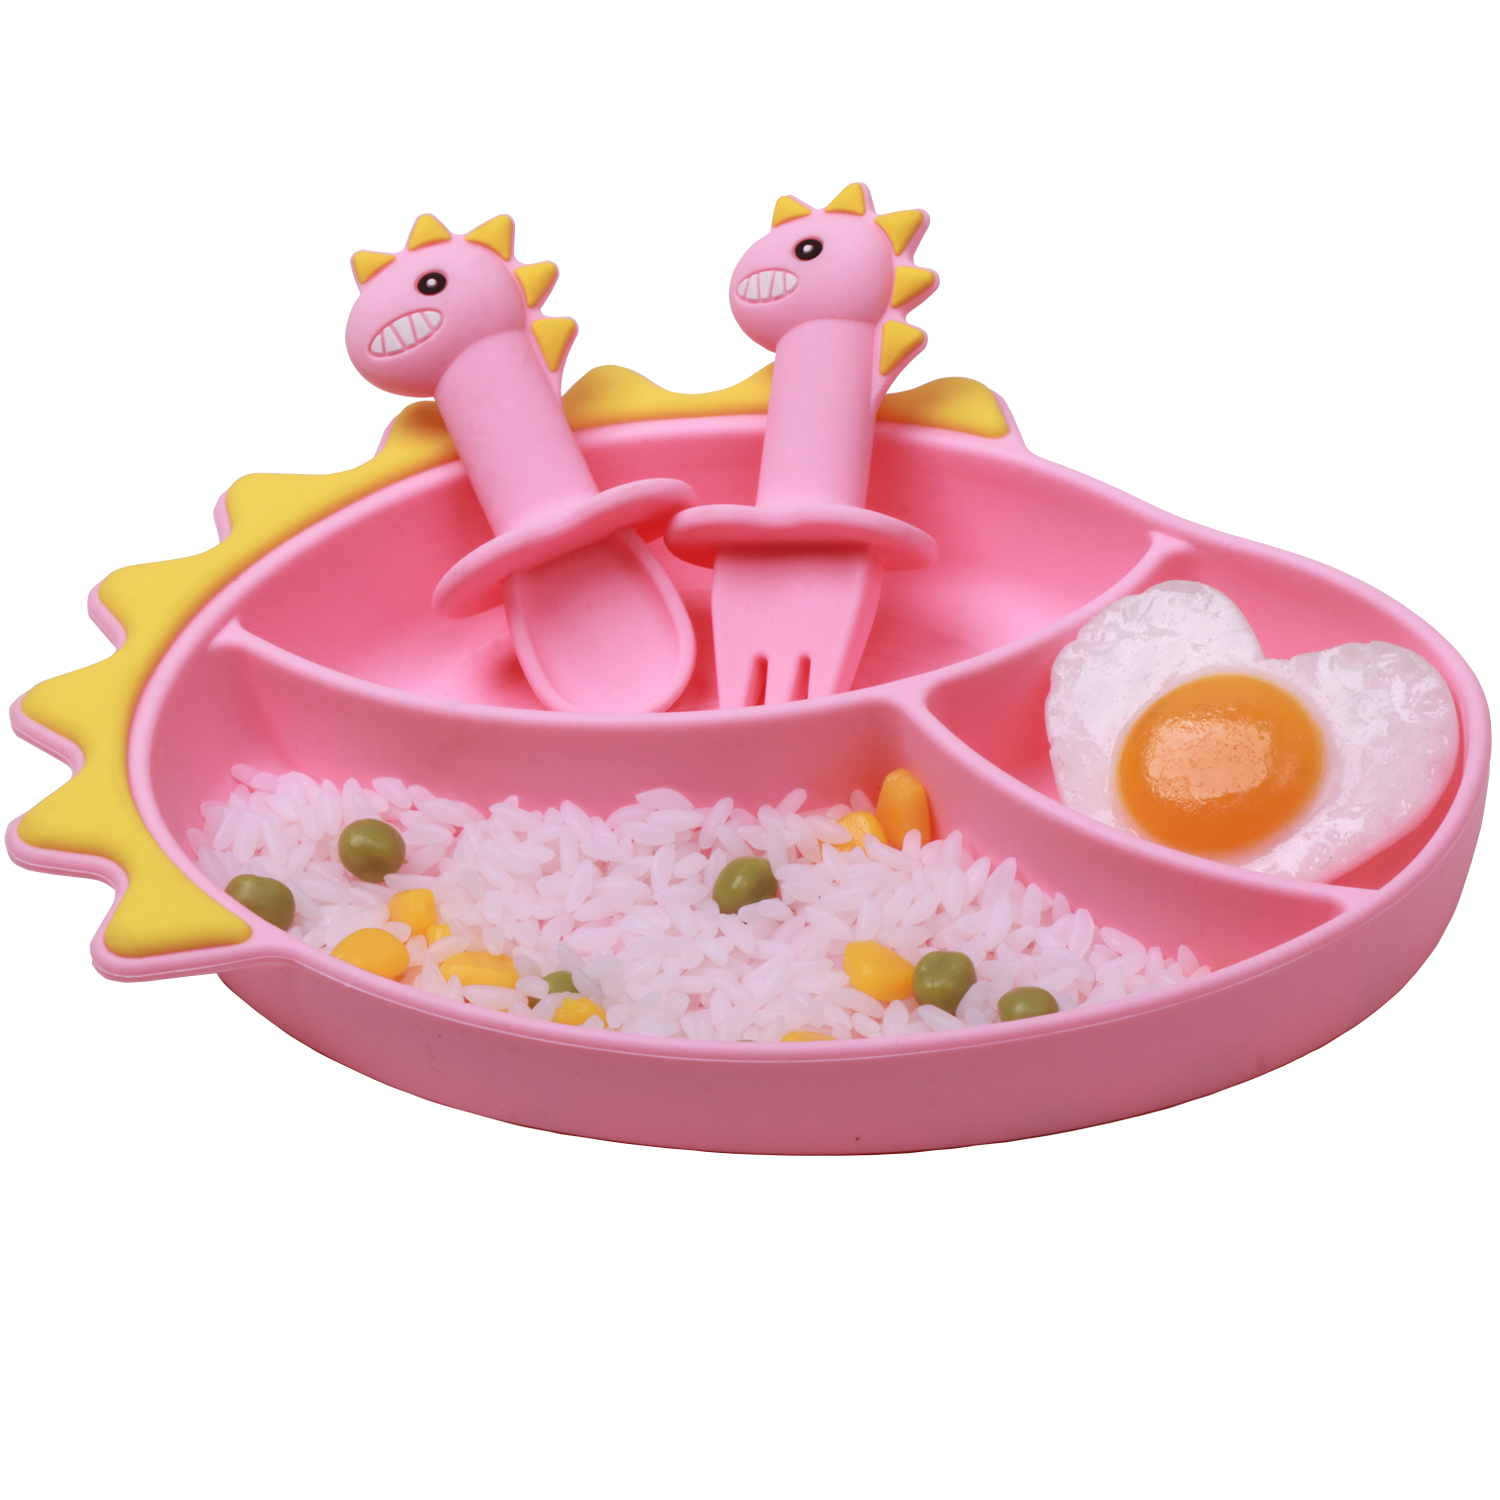 Matyz Baby Feeding Suction Warm Plate with Draining and Drying Design -  Stay Put Divided Plate for Kids - Including 1 Toddler Plate and 2 Spoons 